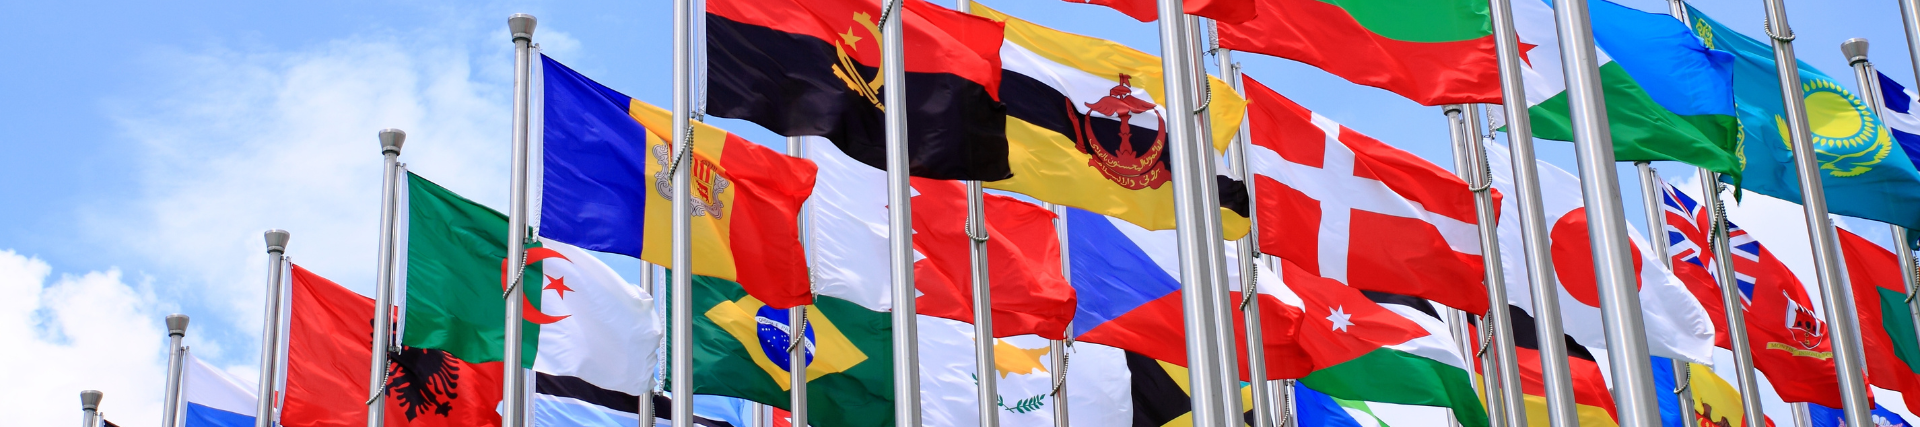 A range of international flags from around the world.